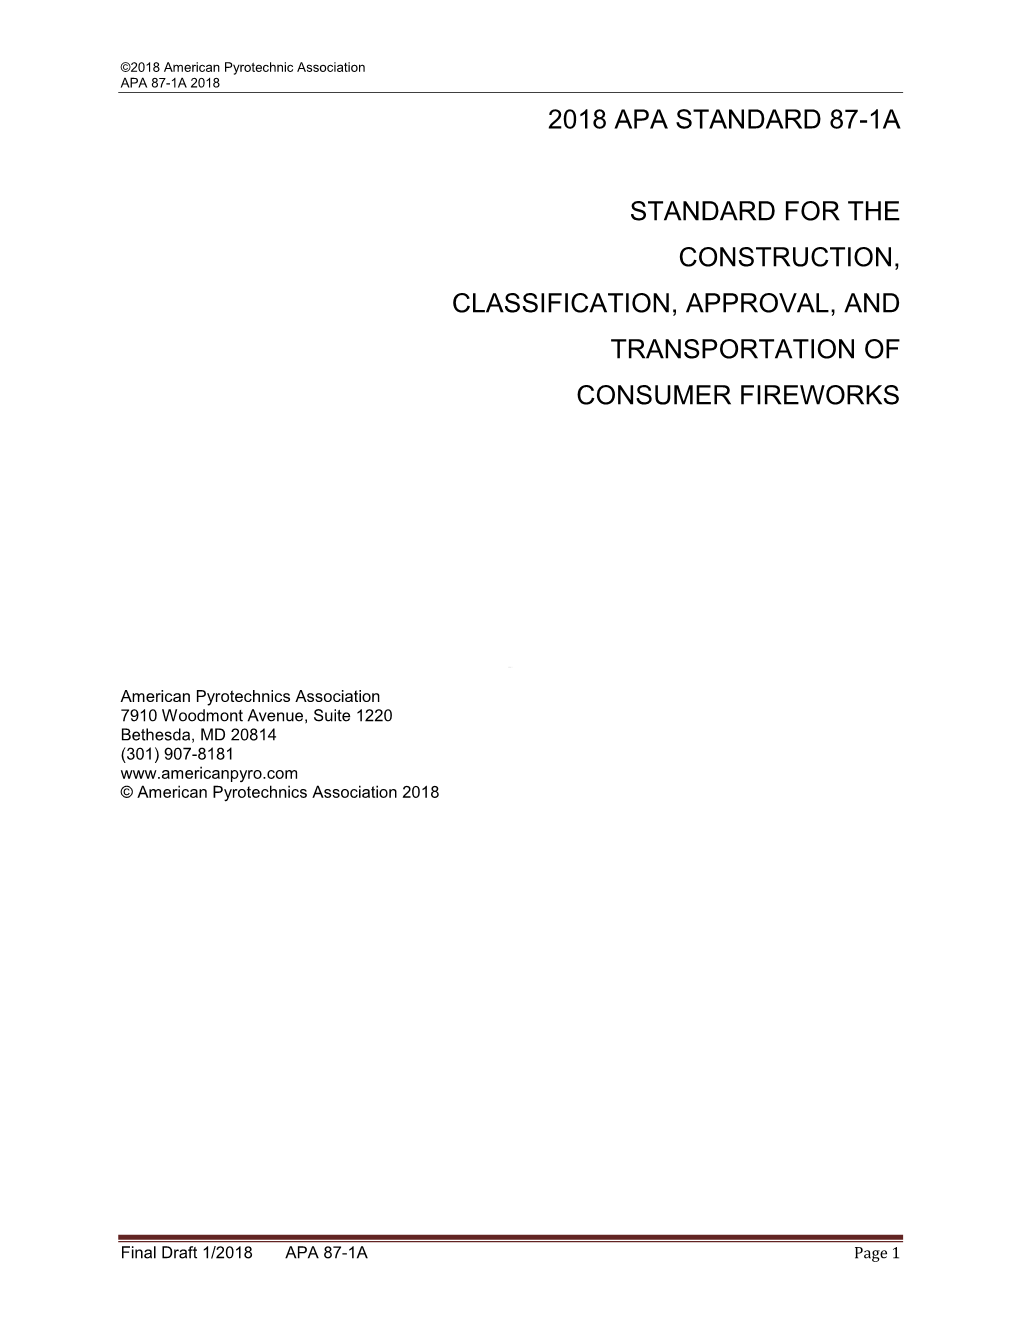 APA 87-1A Standard for the Construction, Classification